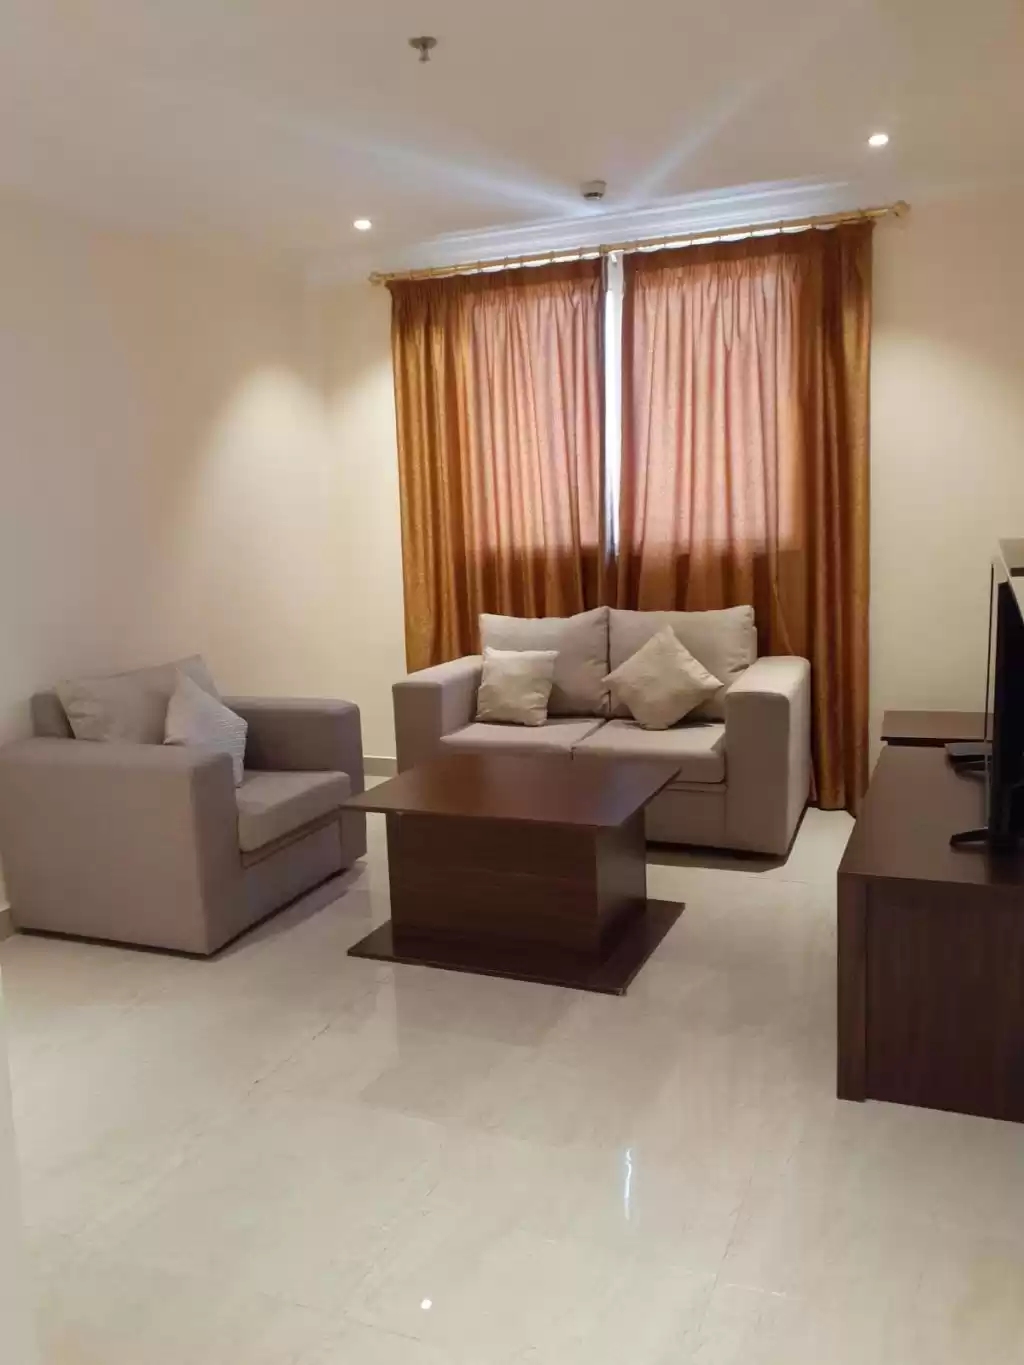 Residential Ready Property 1 Bedroom F/F Apartment  for rent in Al Sadd , Doha #10818 - 1  image 